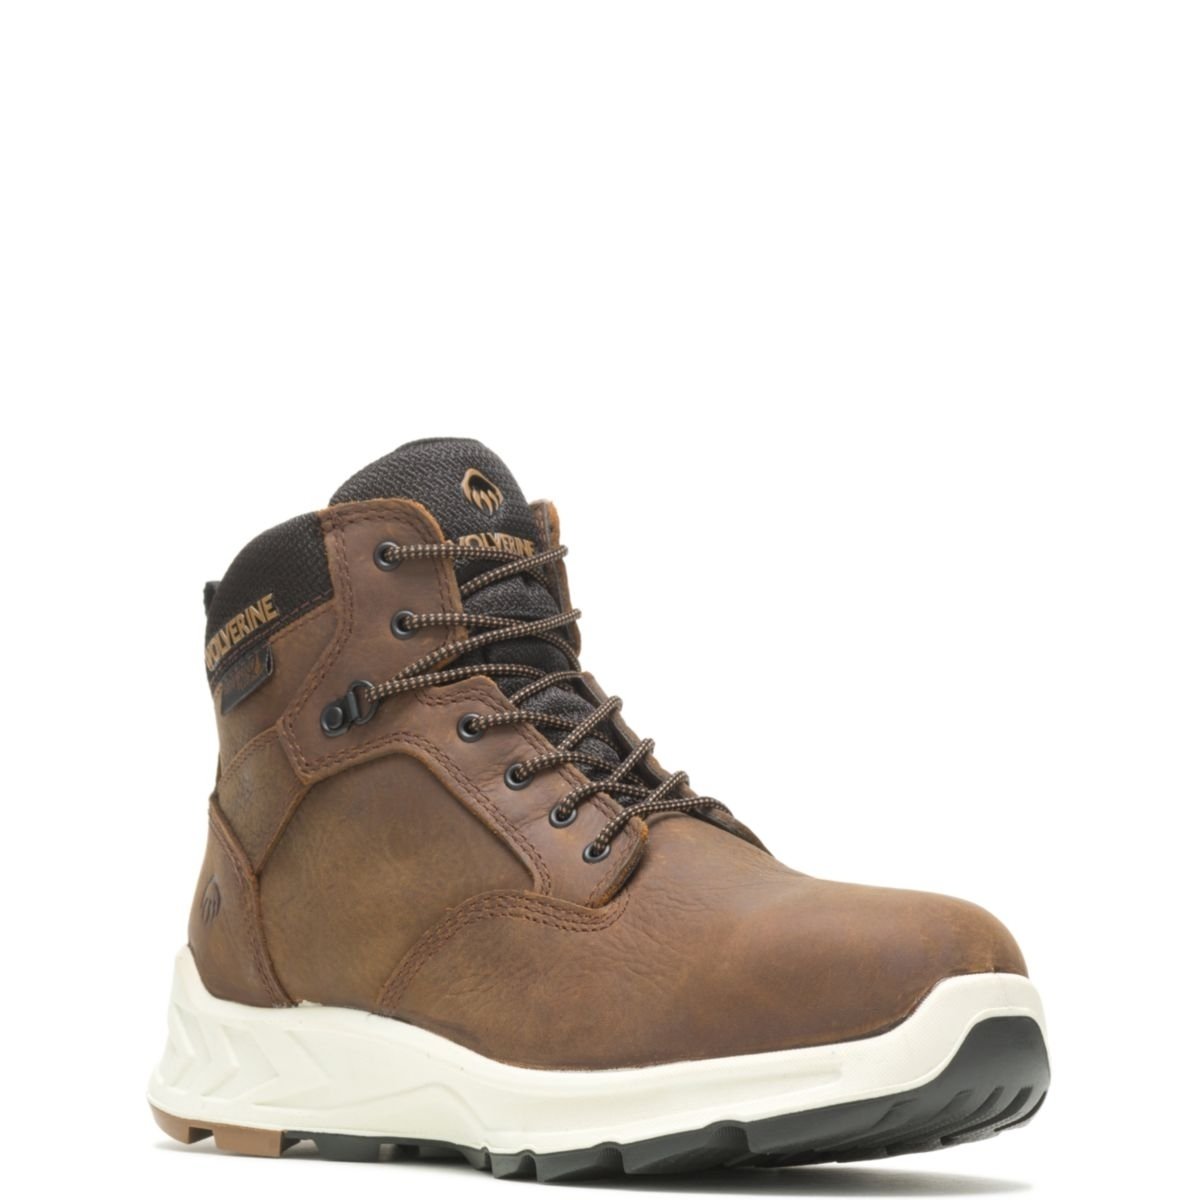 WOLVERINE Men's ShiftPlus Work LX 6 Alloy Toe Work Boot Brown - W201156 BROWN - BROWN, 13-M